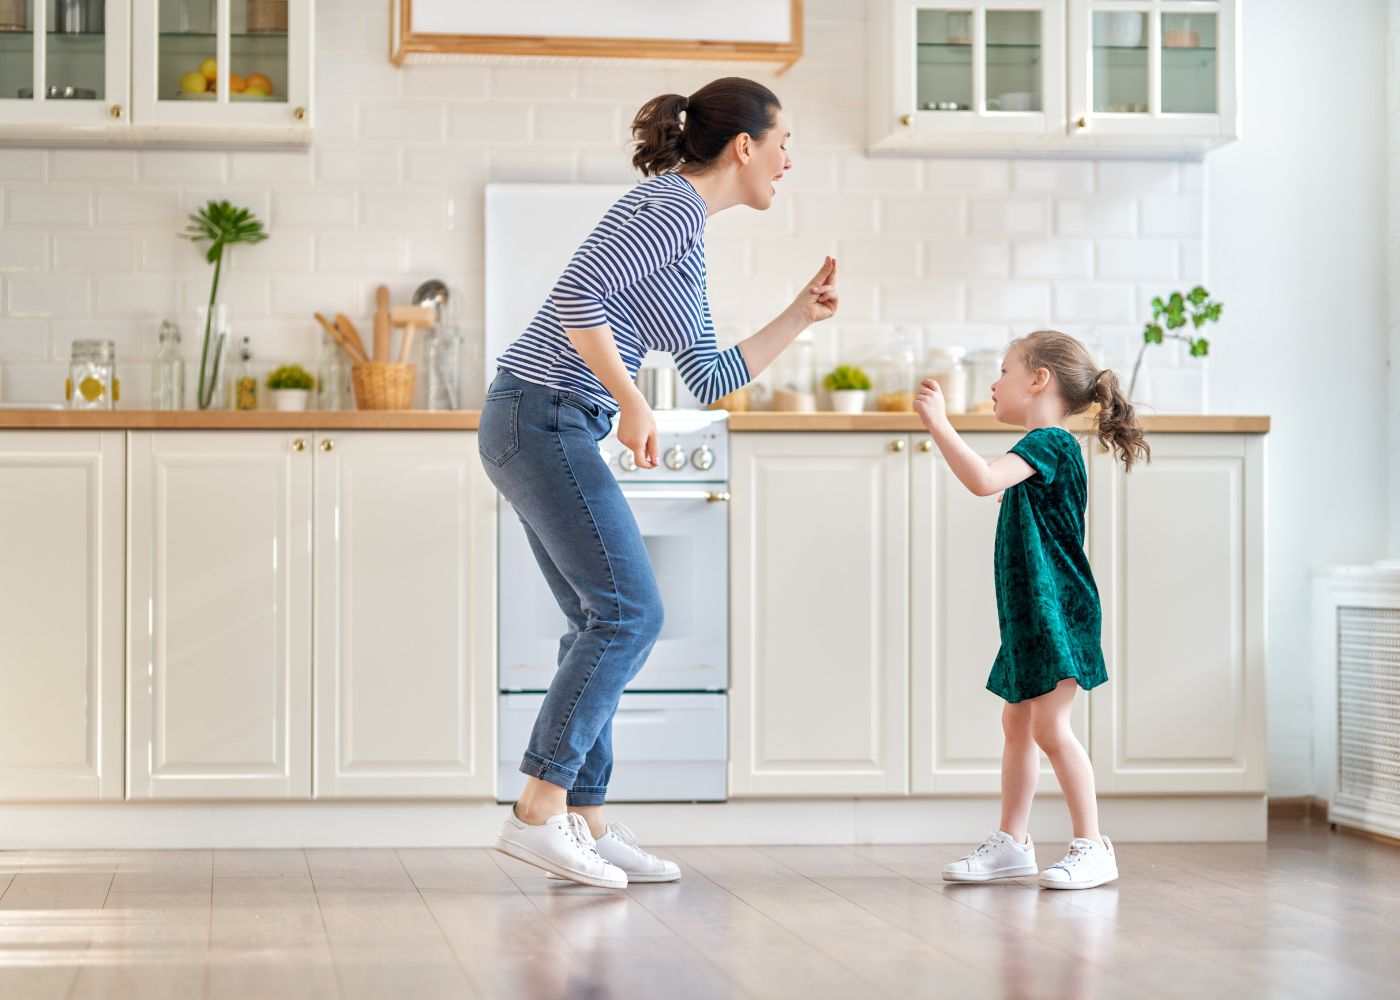 How Kitch’n Dancing Enhances Stress Relief